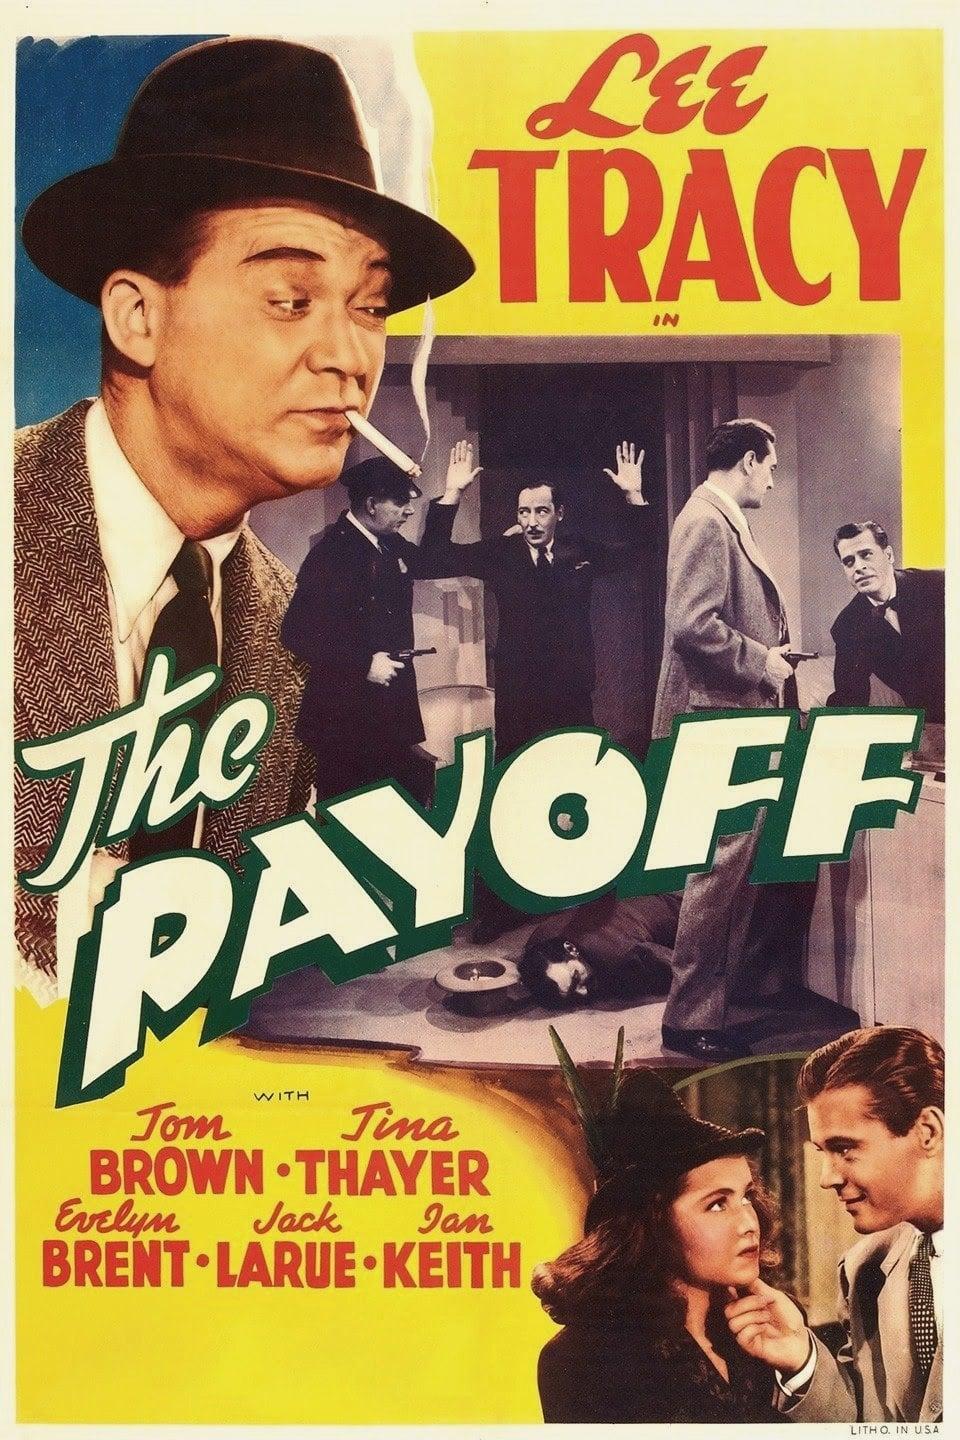 The Payoff poster